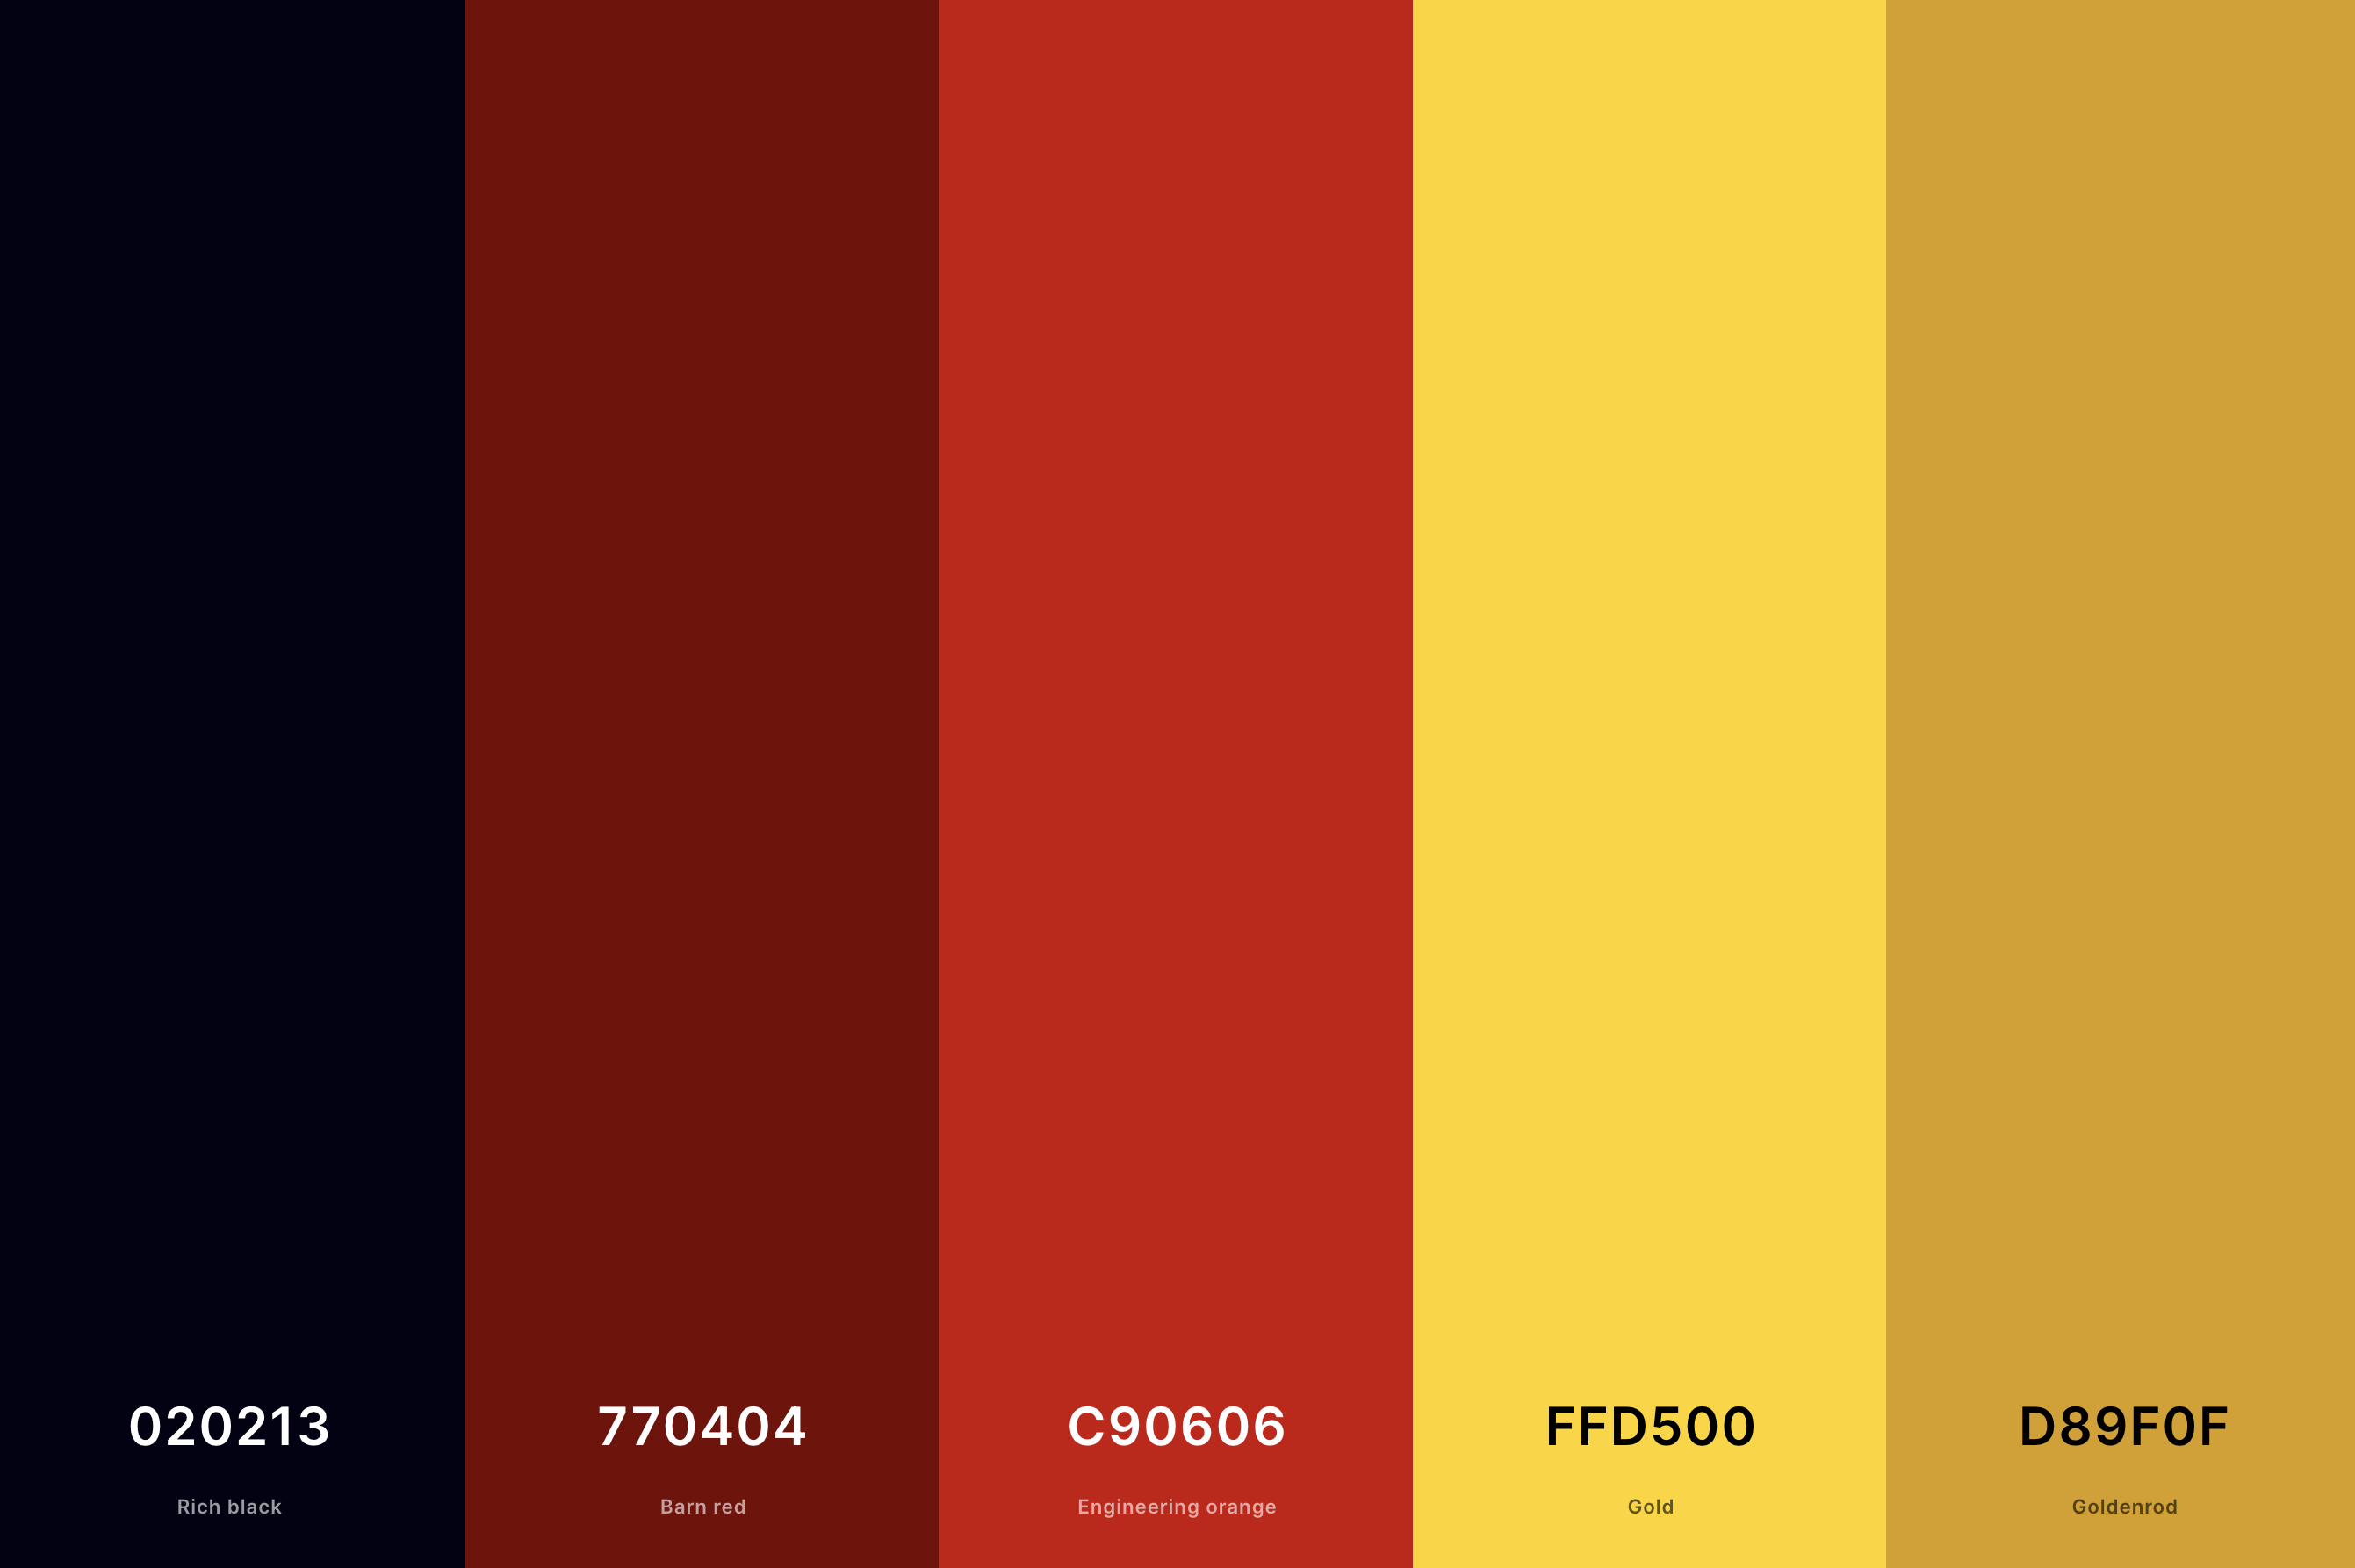 20. Red, Black And Gold Color Palette Color Palette with Rich Black (Hex #020213) + Barn Red (Hex #770404) + Engineering Orange (Hex #C90606) + Gold (Hex #FFD500) + Goldenrod (Hex #D89F0F) Color Palette with Hex Codes